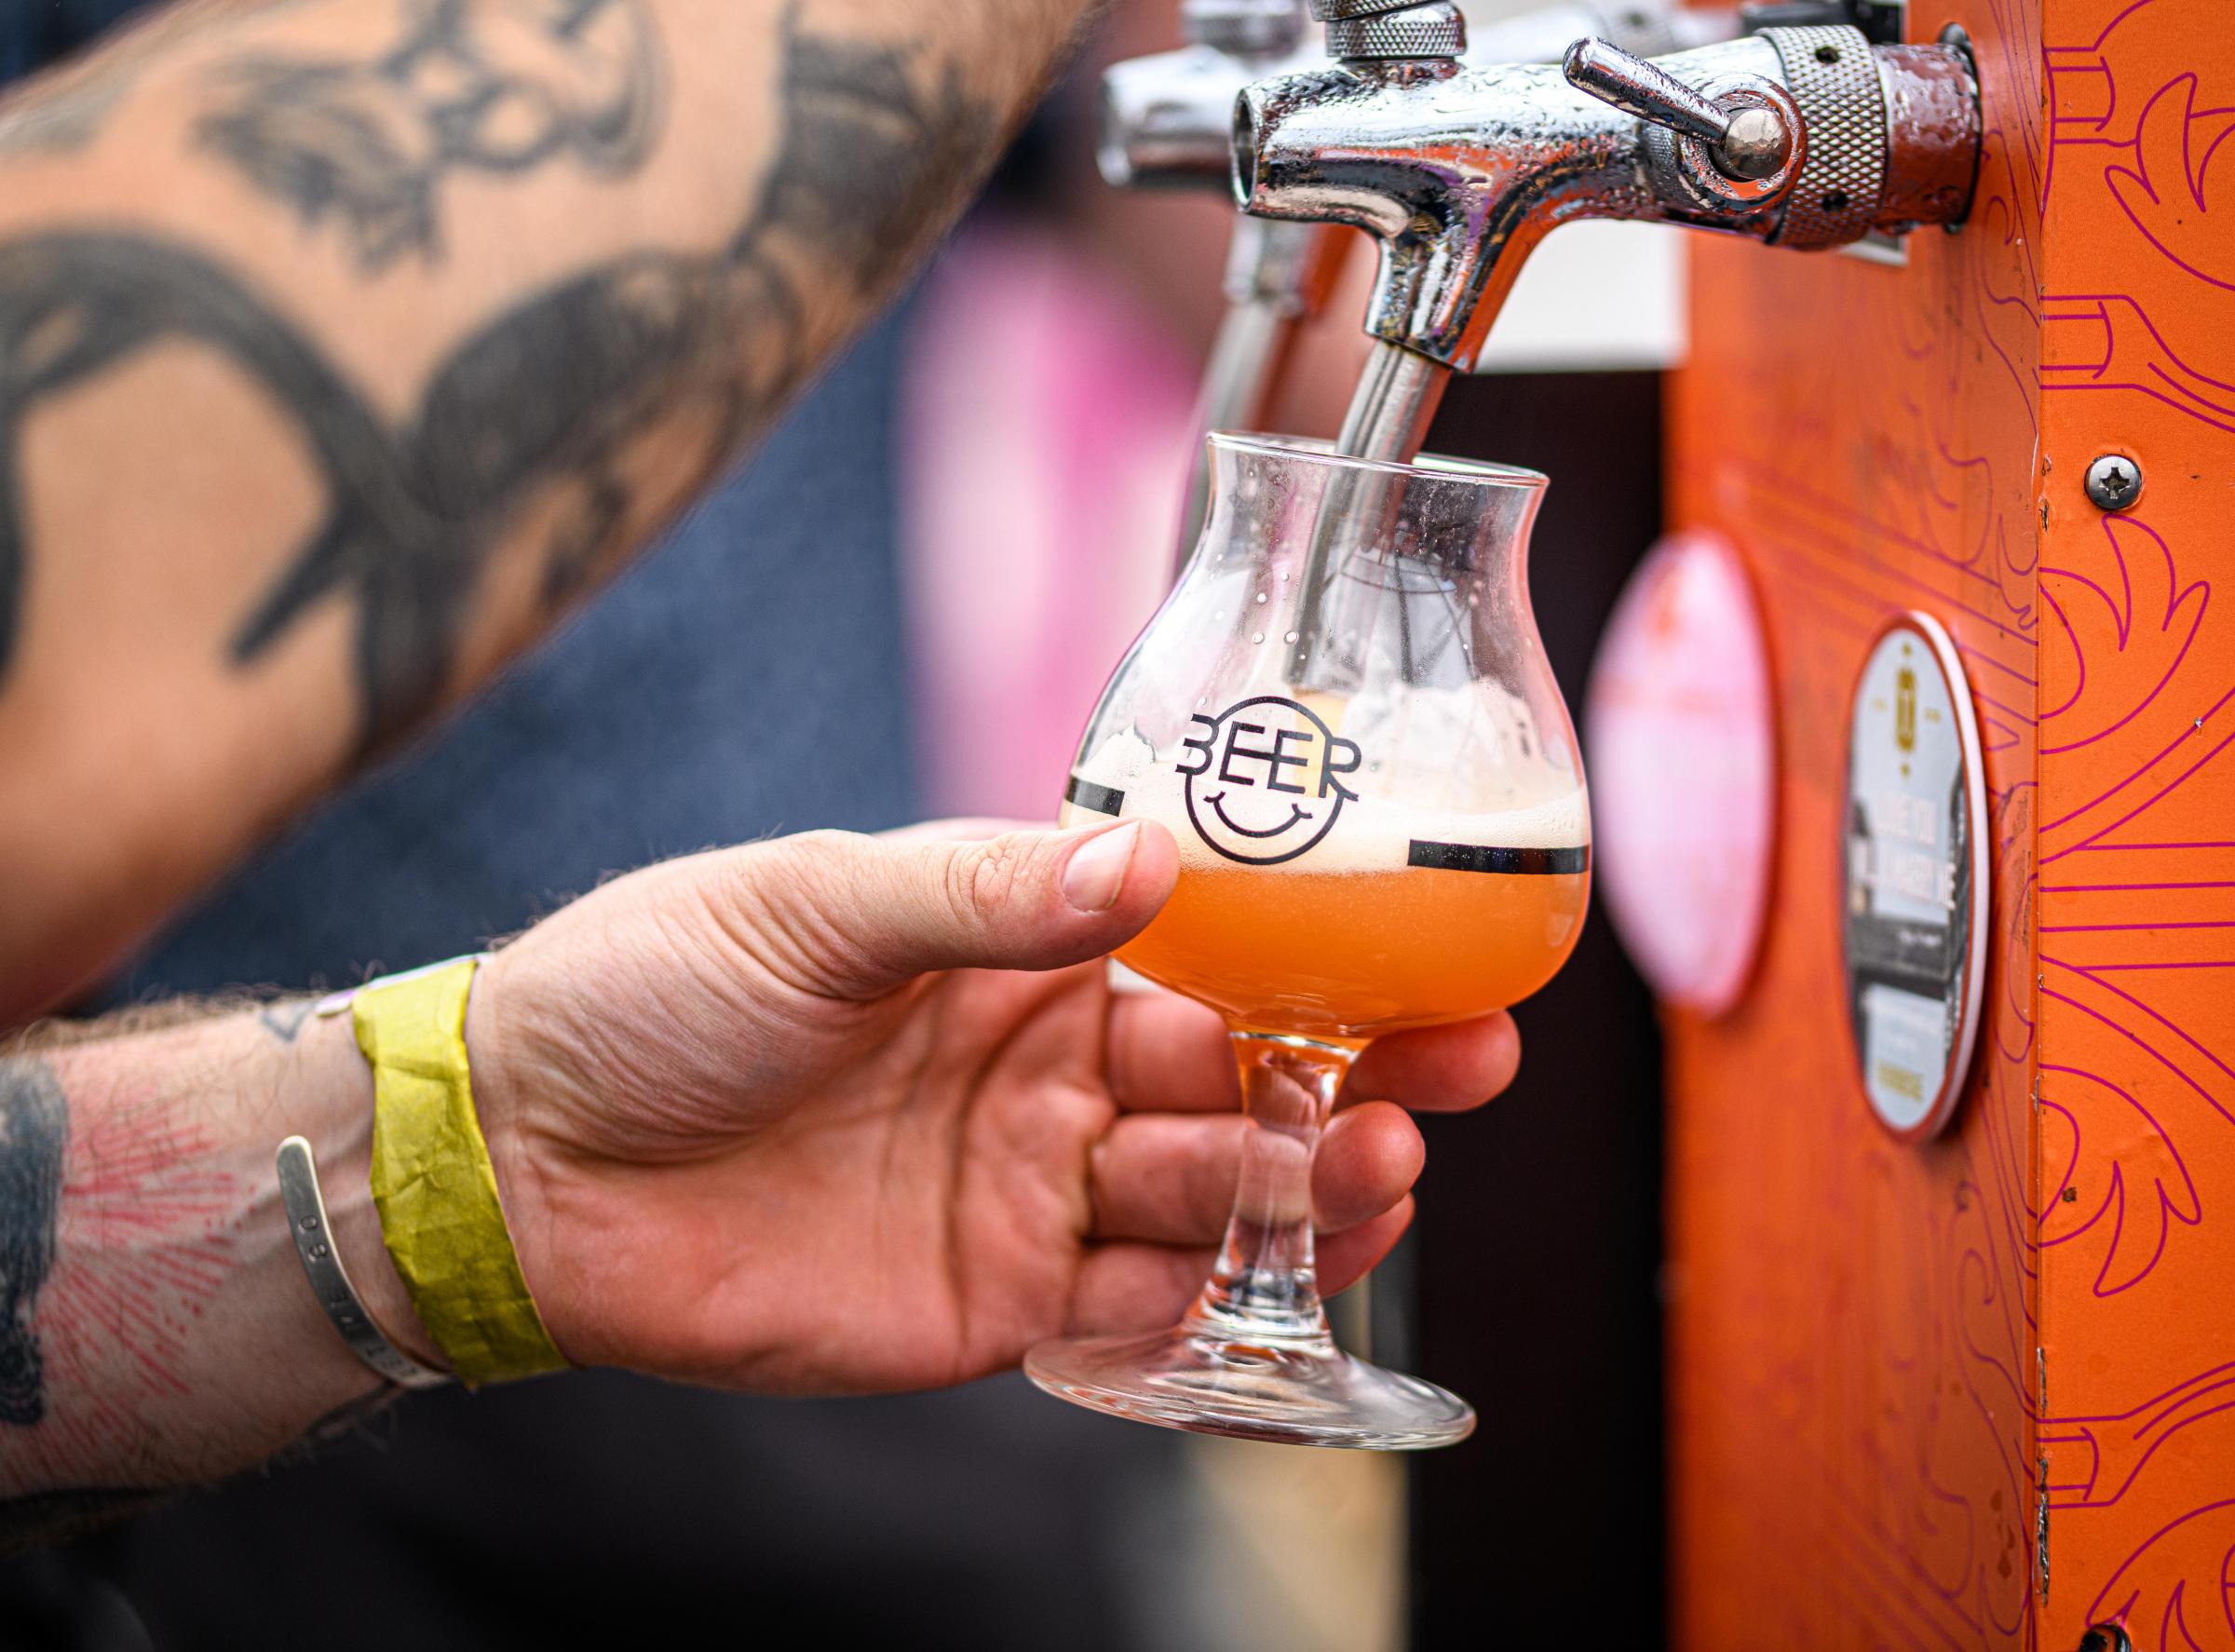 Glasgow Craft Beer Festival pours into SWG3 this weekend